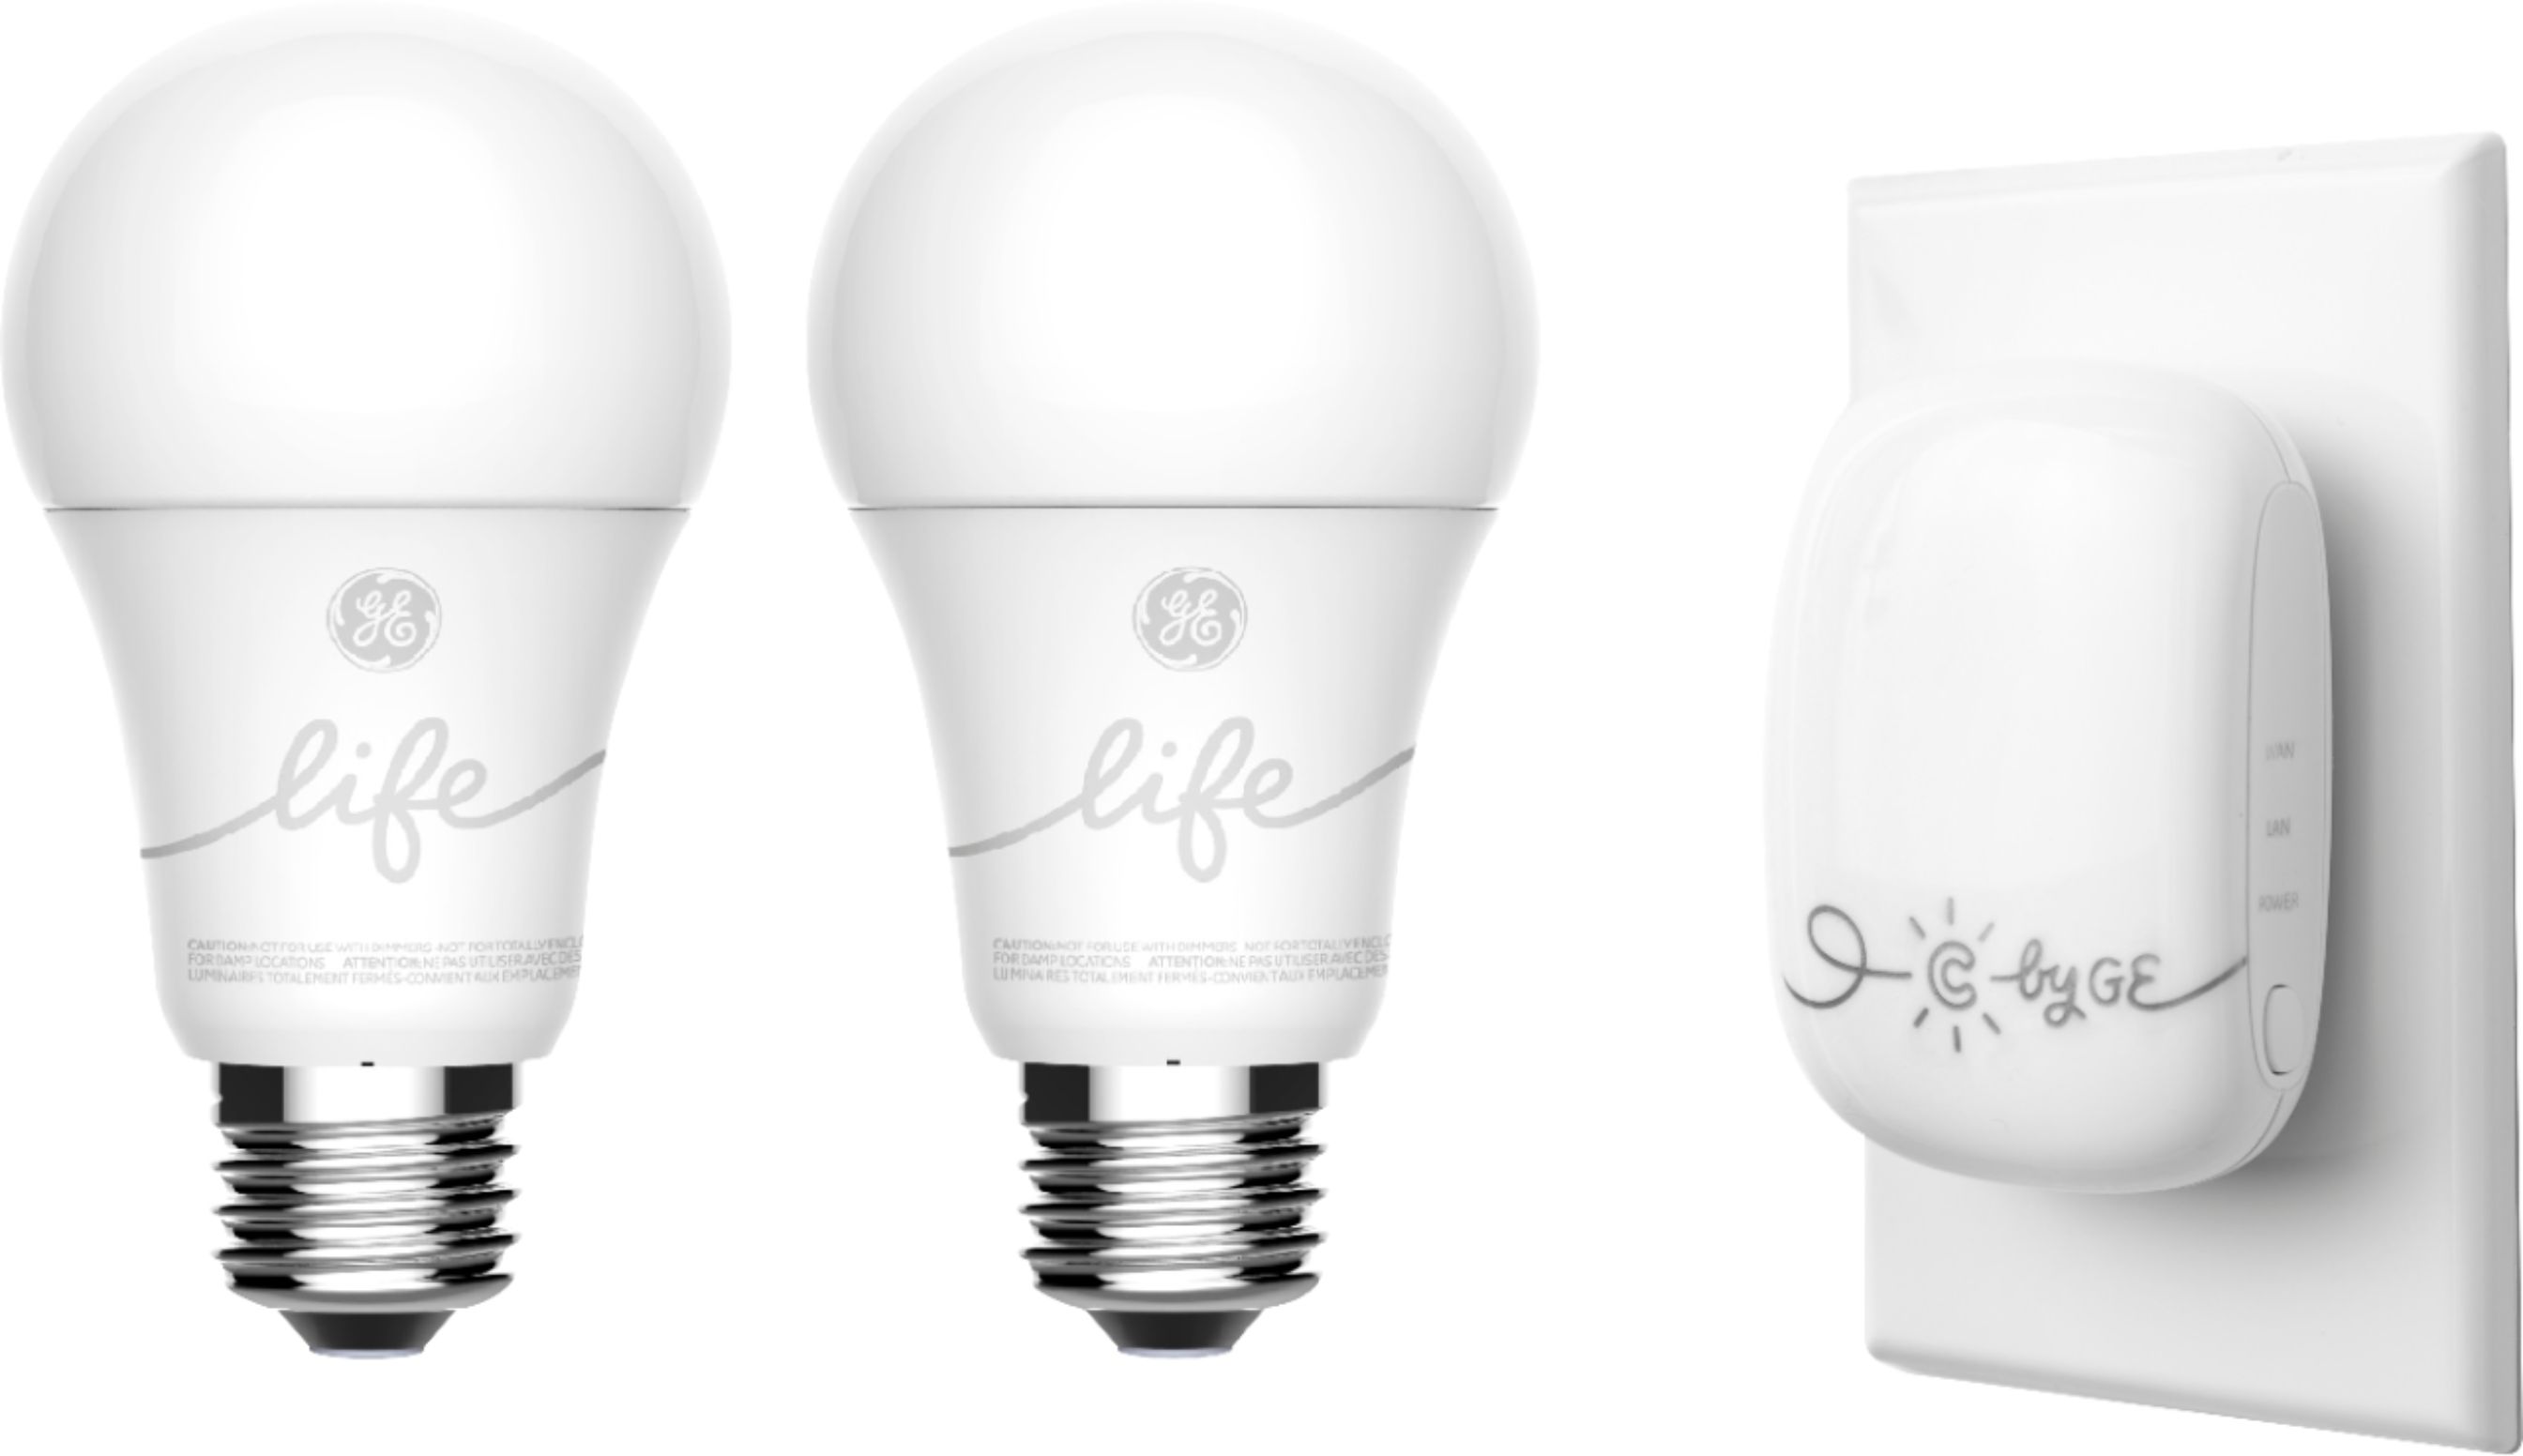 White C by GE C-Life A19 Voice Control Starter Kit 